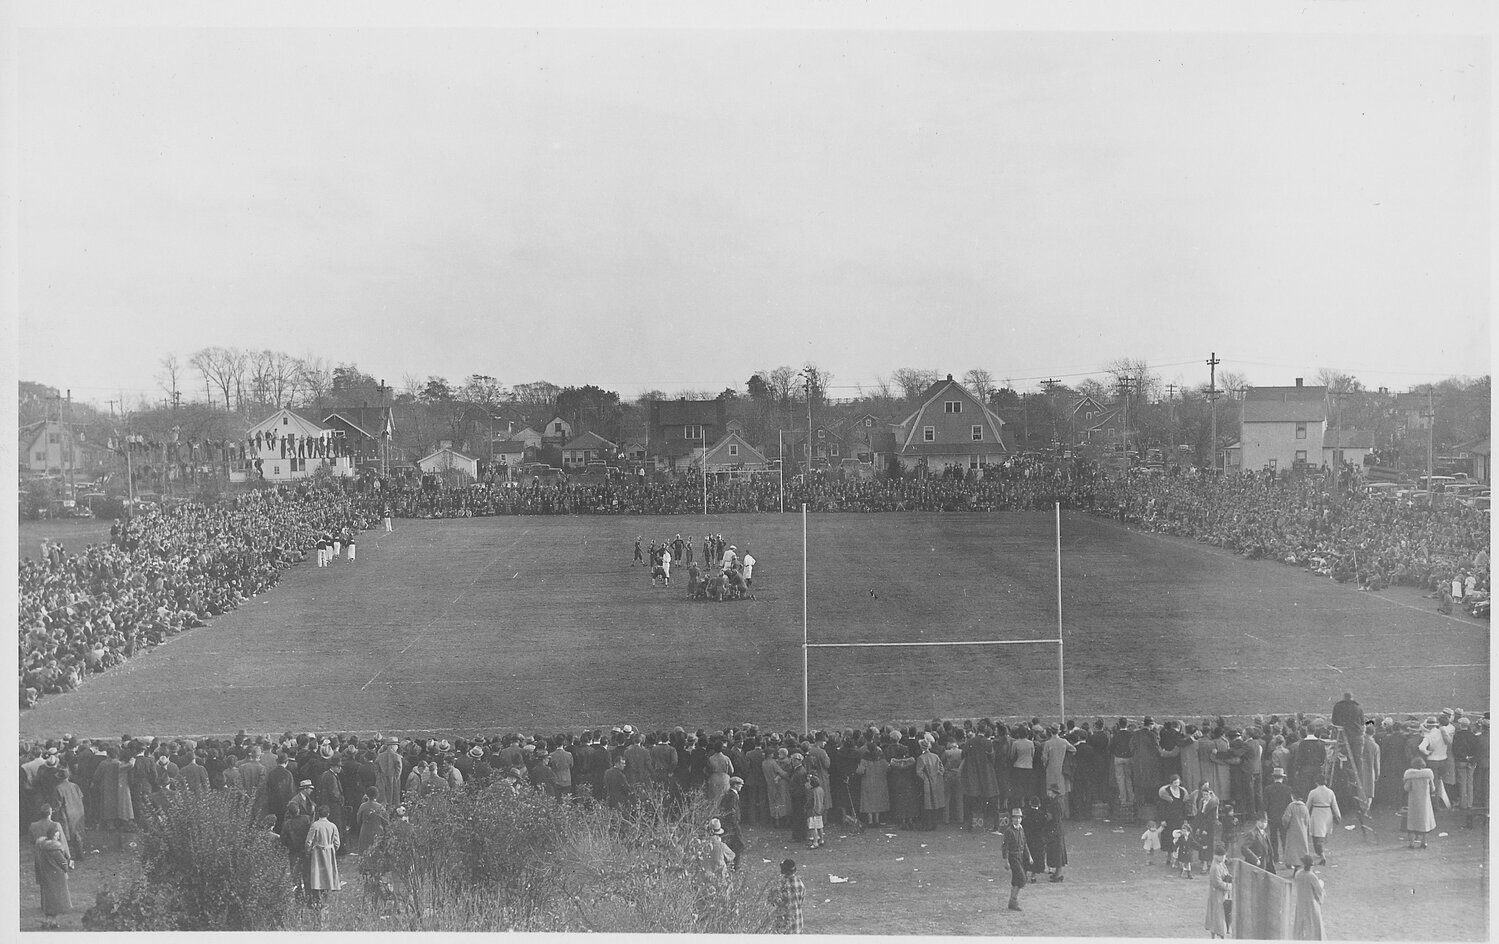 Baldwin goes up against Freeport in 1936 with about 10,000 people in attendance.